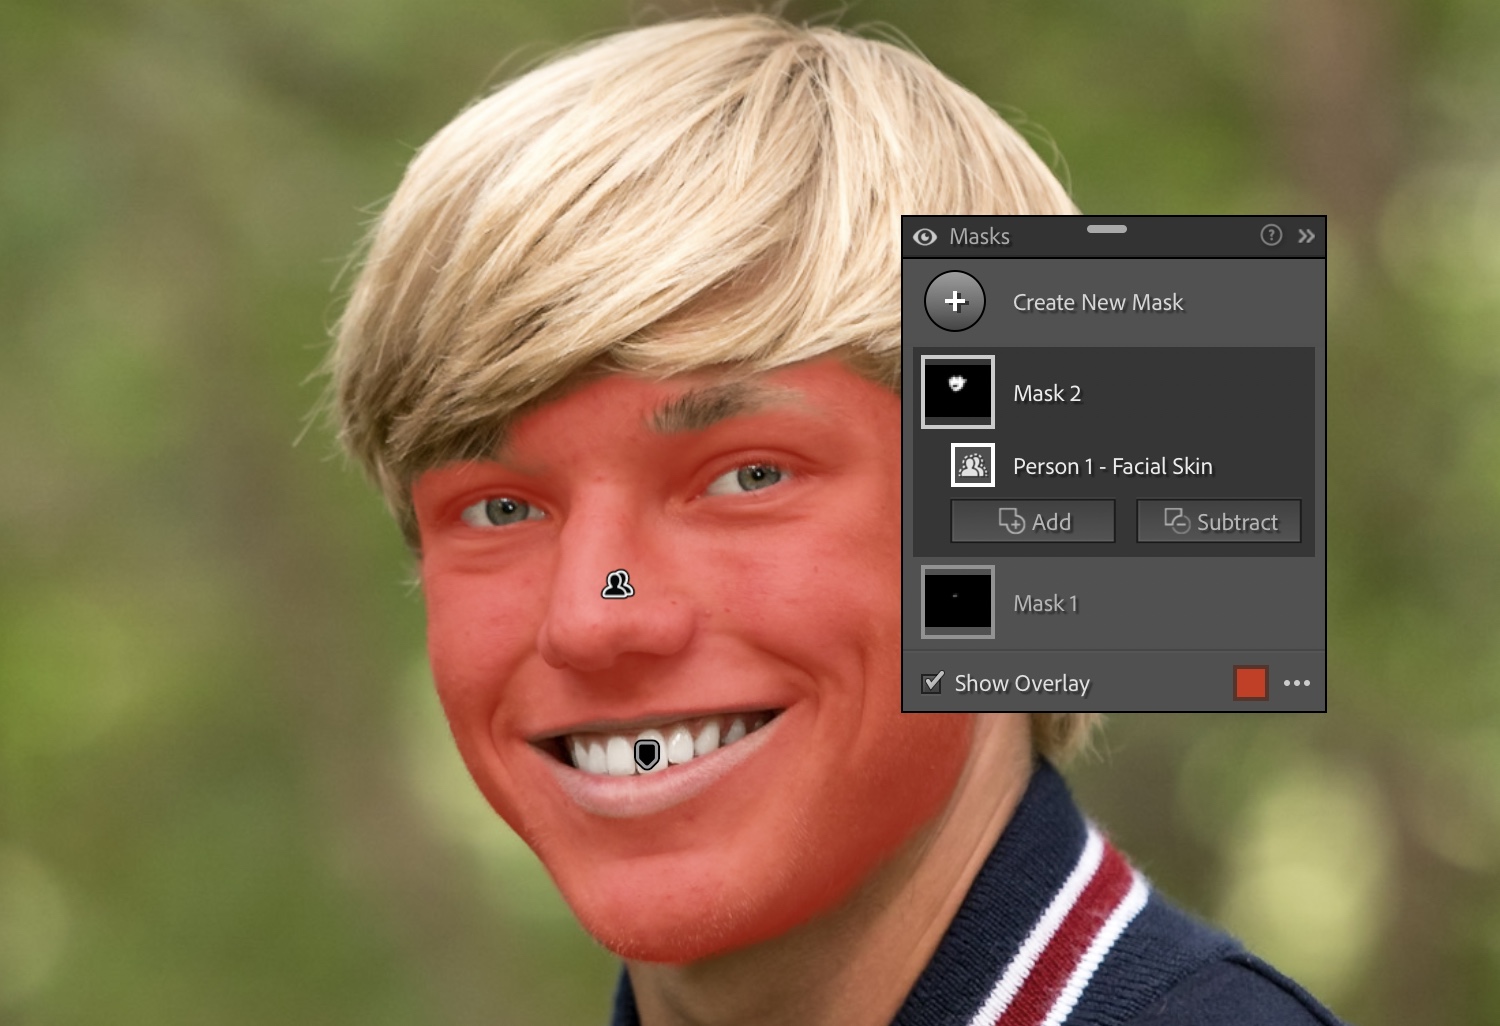 Lightroom AI: Screenshot showing an AI-generated Facial Skin mask. The skin is masked, but not the other facial features like eyes, teeth, and eyebrows.